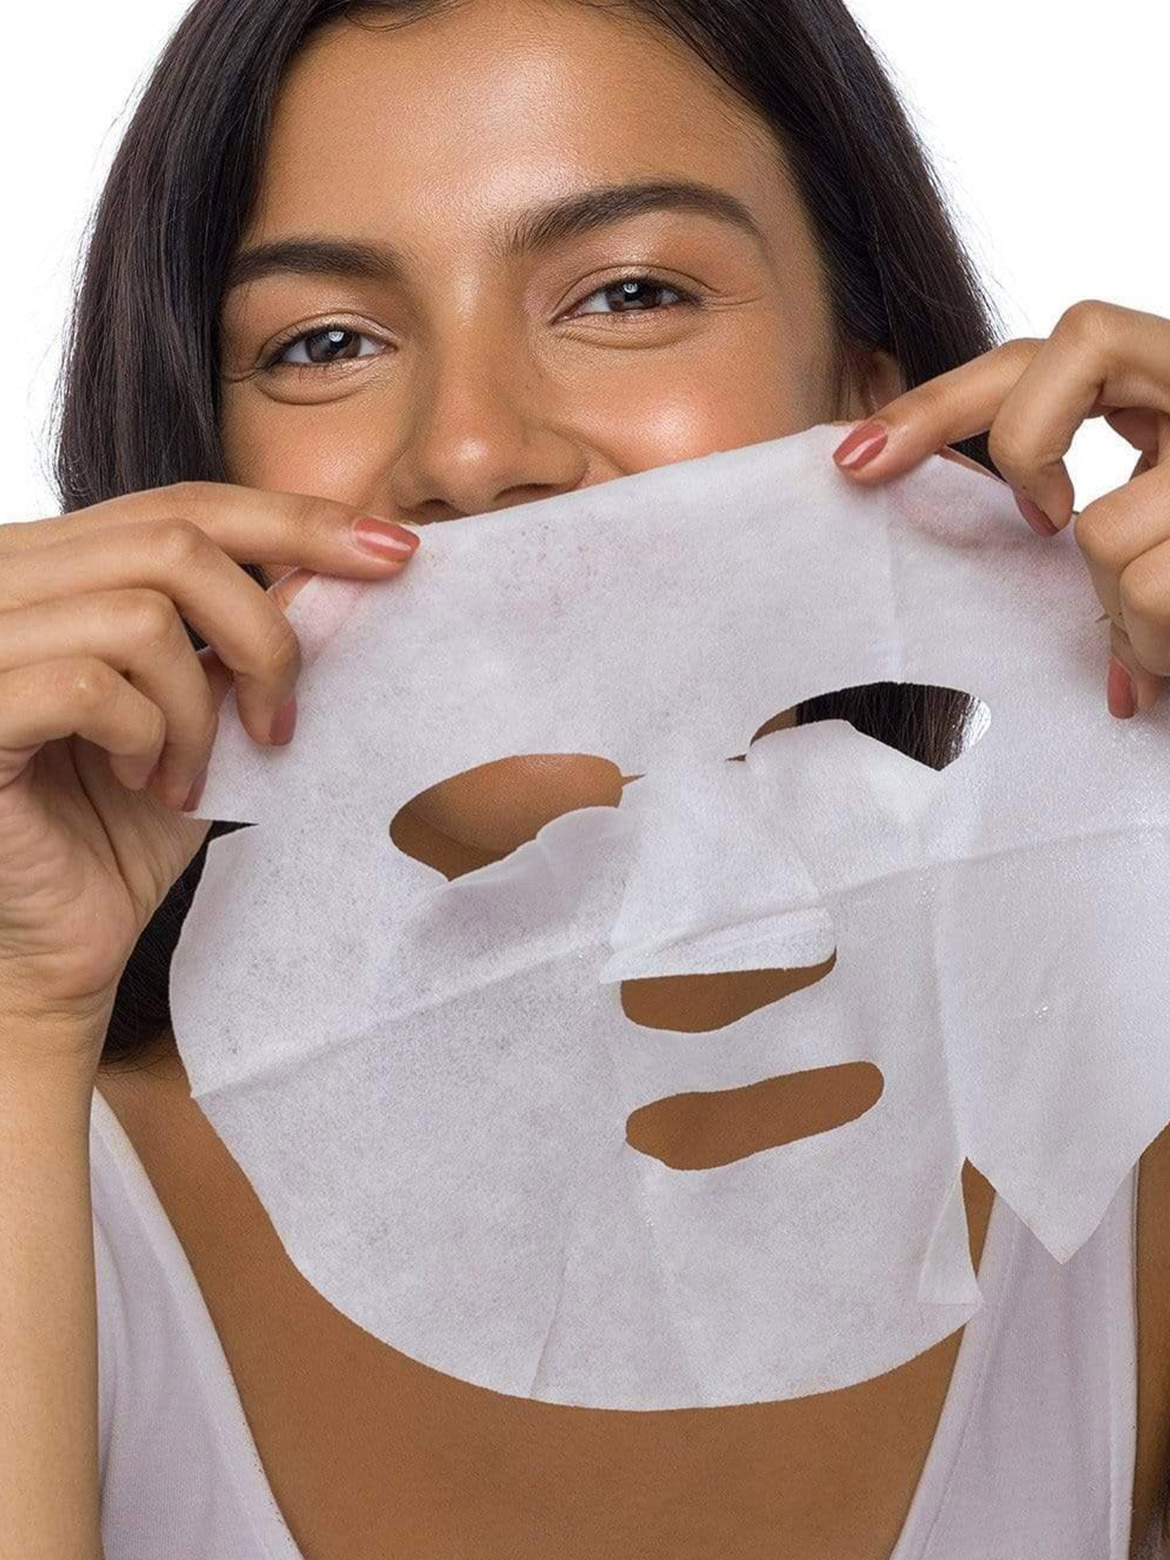 Treat Your Skin To Sheet masks While You WFH